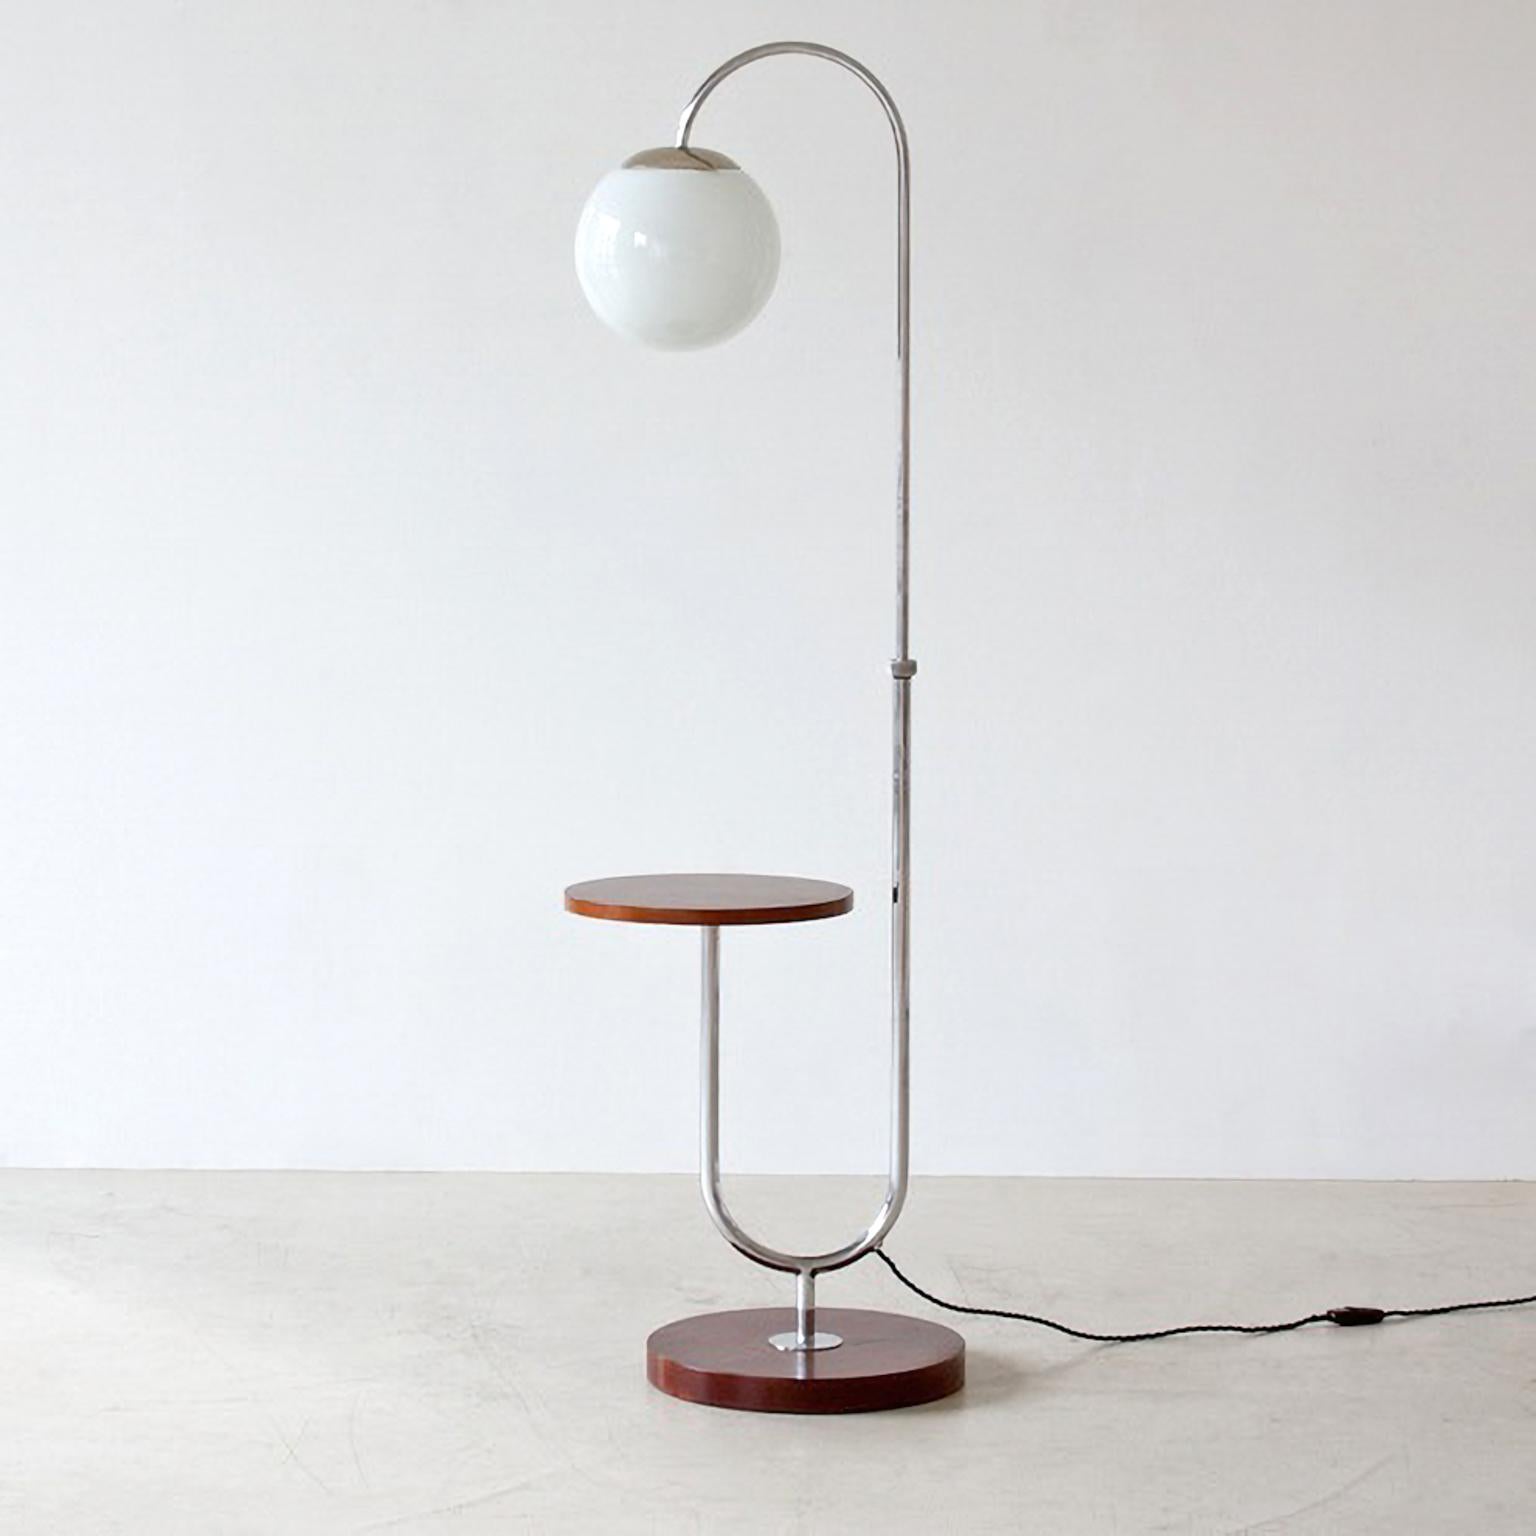 Modernist floor lamp with integrated low table. The tubular steel structure is made of nickel plated metal, fixed on a round wooden base and holding a rounded low table on a side. The opaline glass bulb can be high adjusted or turned